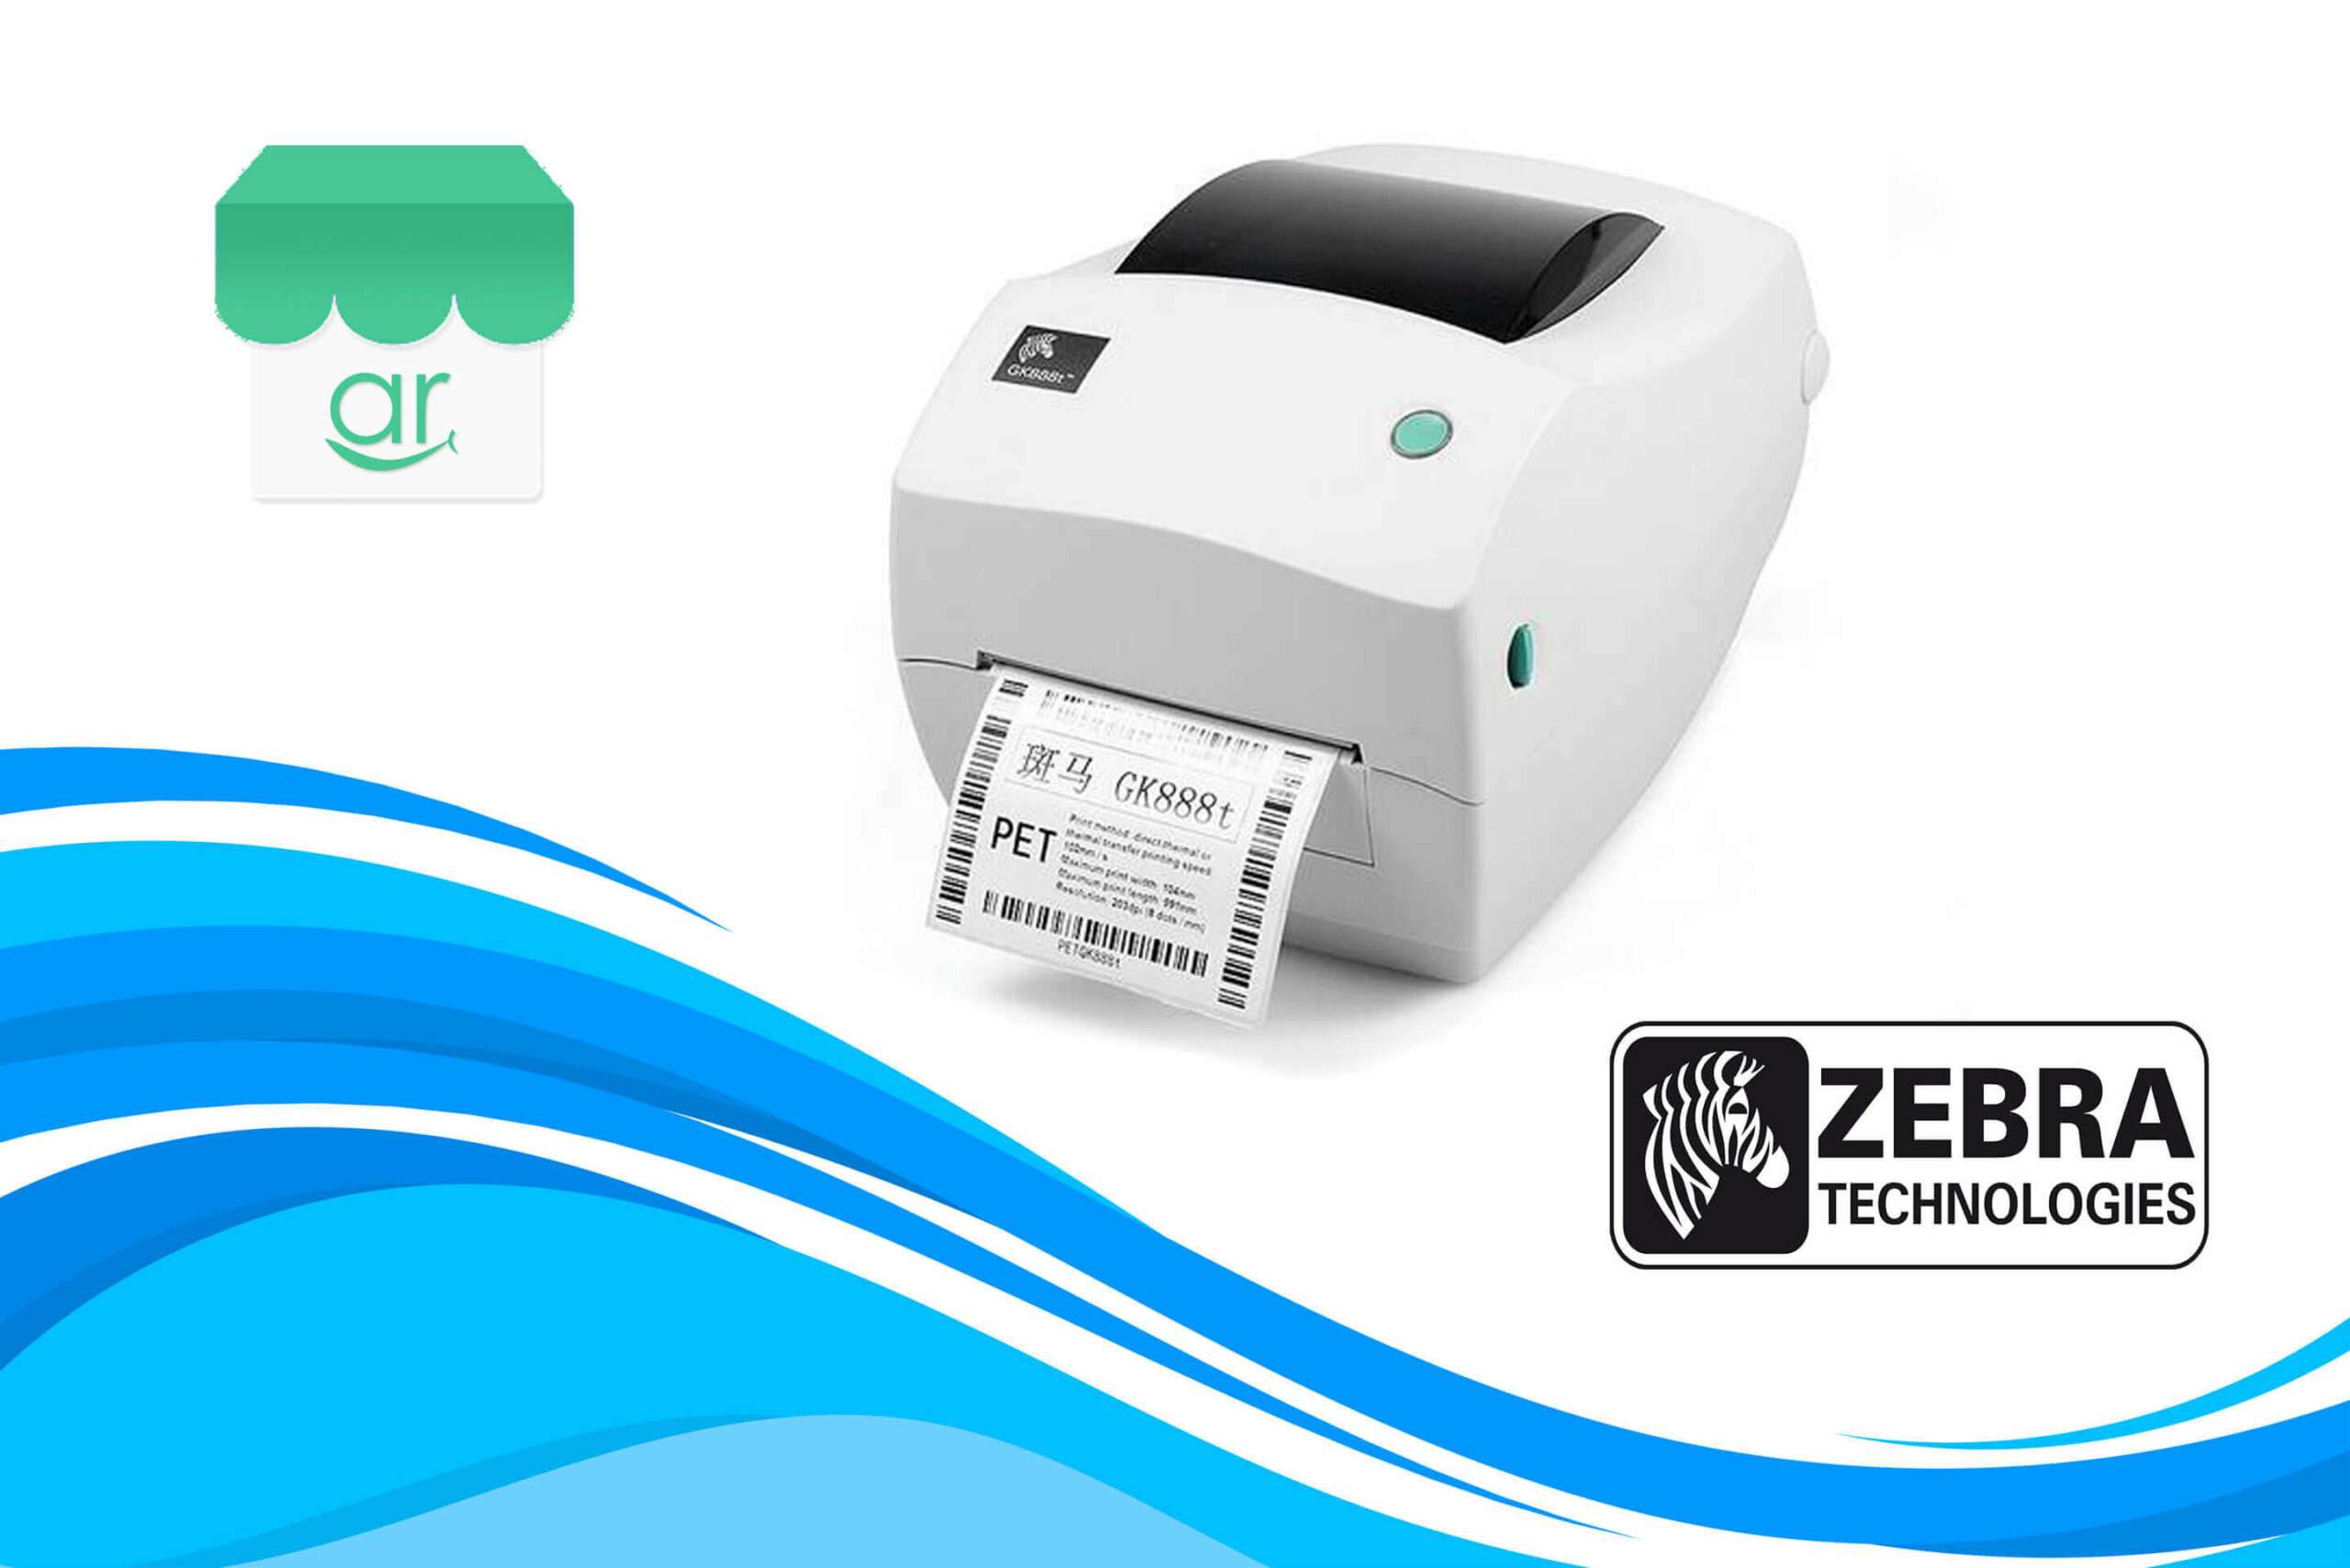 How to Integrate Asaan Retail in Windows and MAC with your Zebra Label Printer